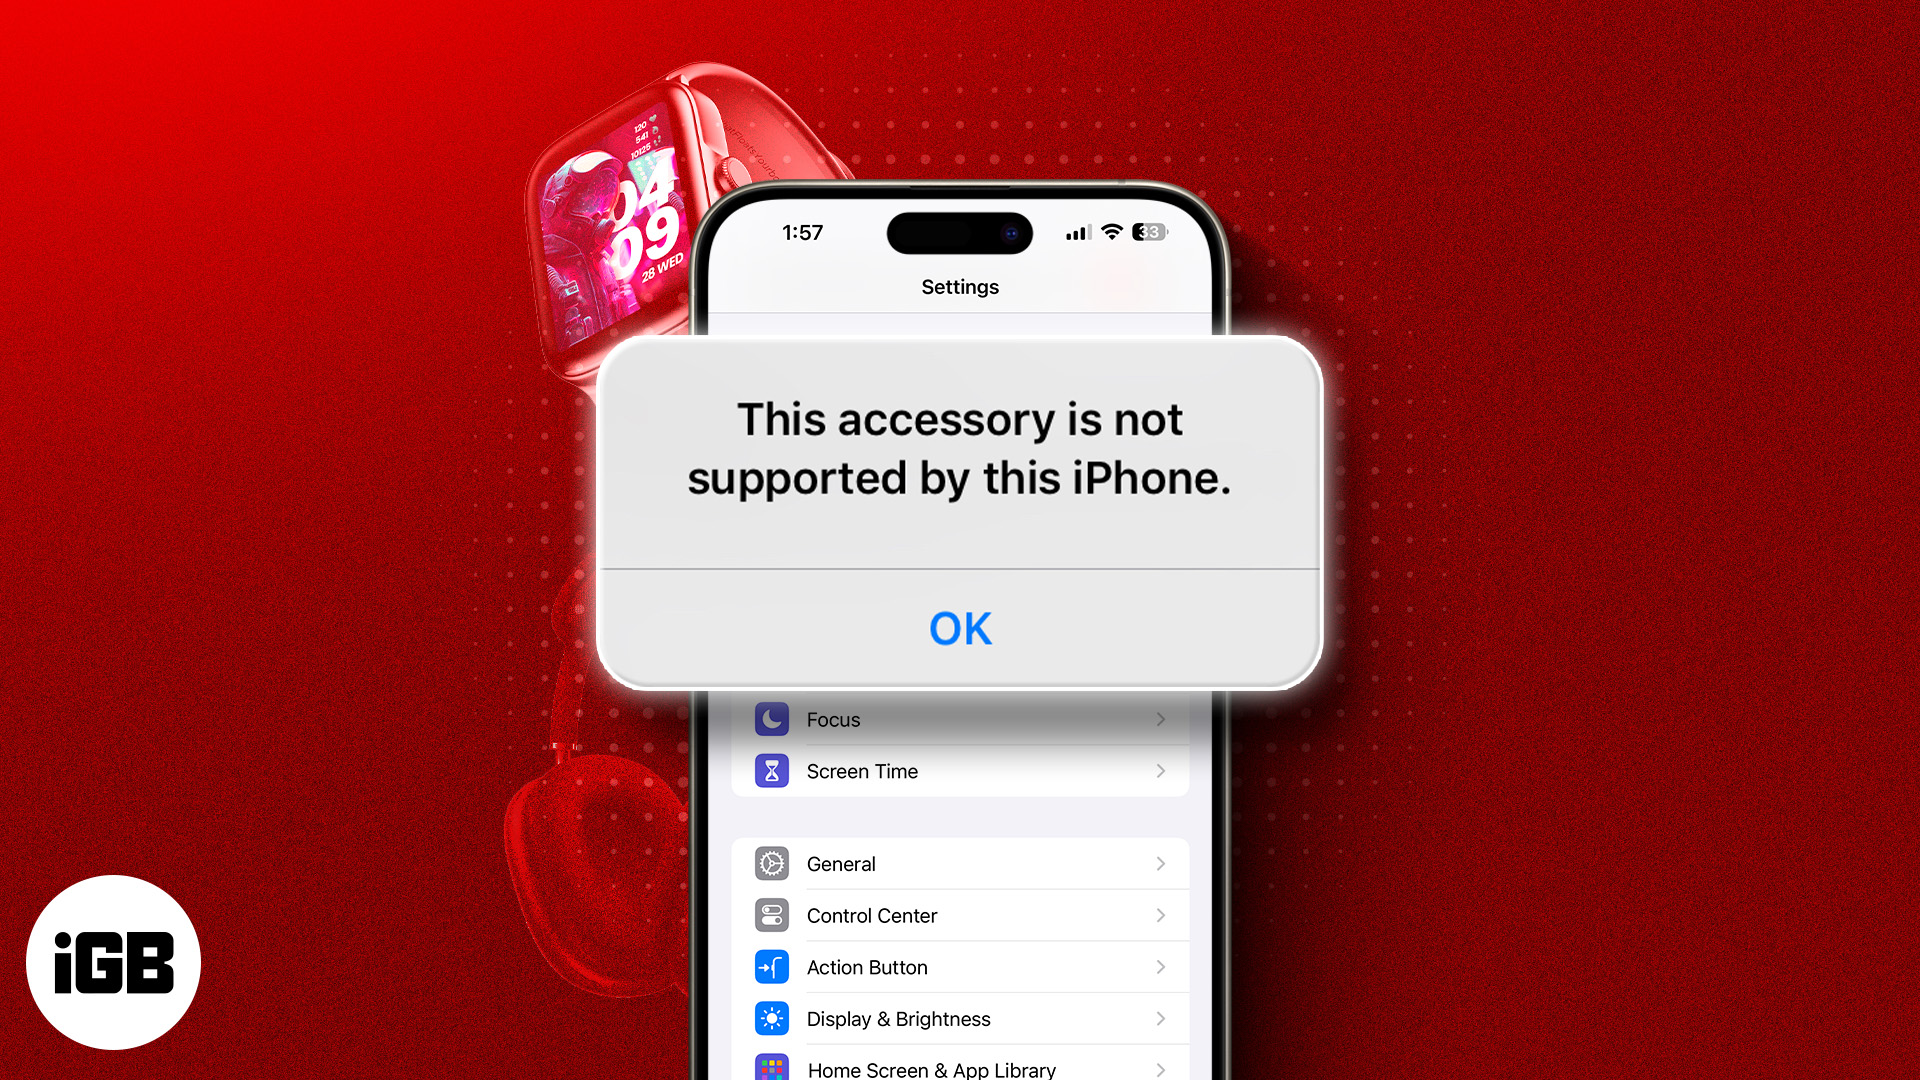 How to fix “This Accessory May Not Be Supported” on iPhone